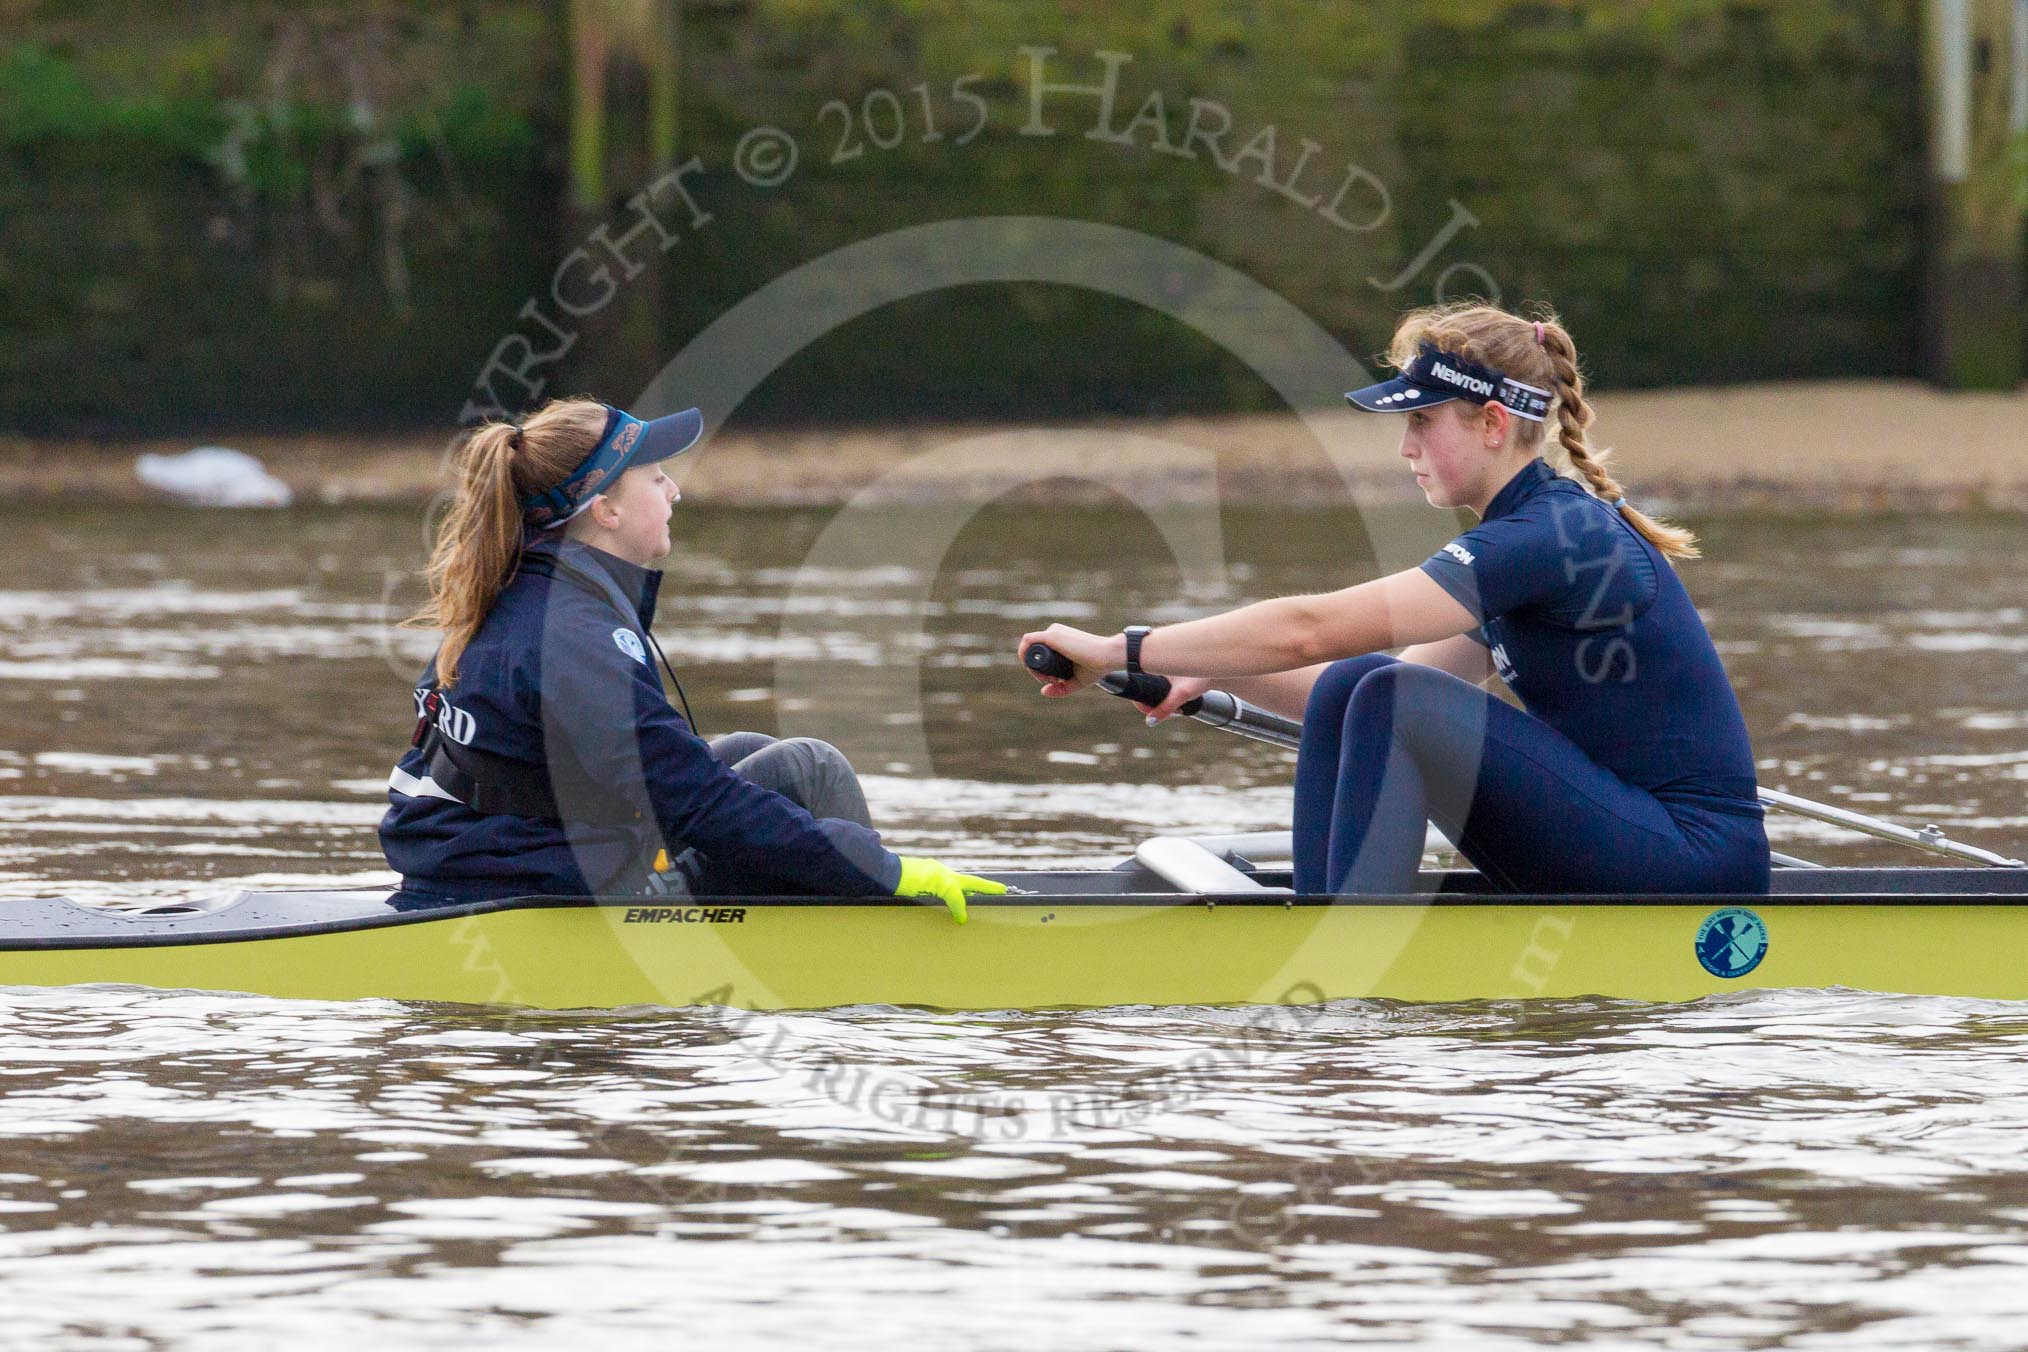 The Boat Race season 2016 - Women's Boat Race Trial Eights (OUWBC, Oxford): "Charybdis" ready for the start of the race, here cox-Morgan Baynham-Williams, stroke-Kate Erickson.
River Thames between Putney Bridge and Mortlake,
London SW15,

United Kingdom,
on 10 December 2015 at 12:18, image #136